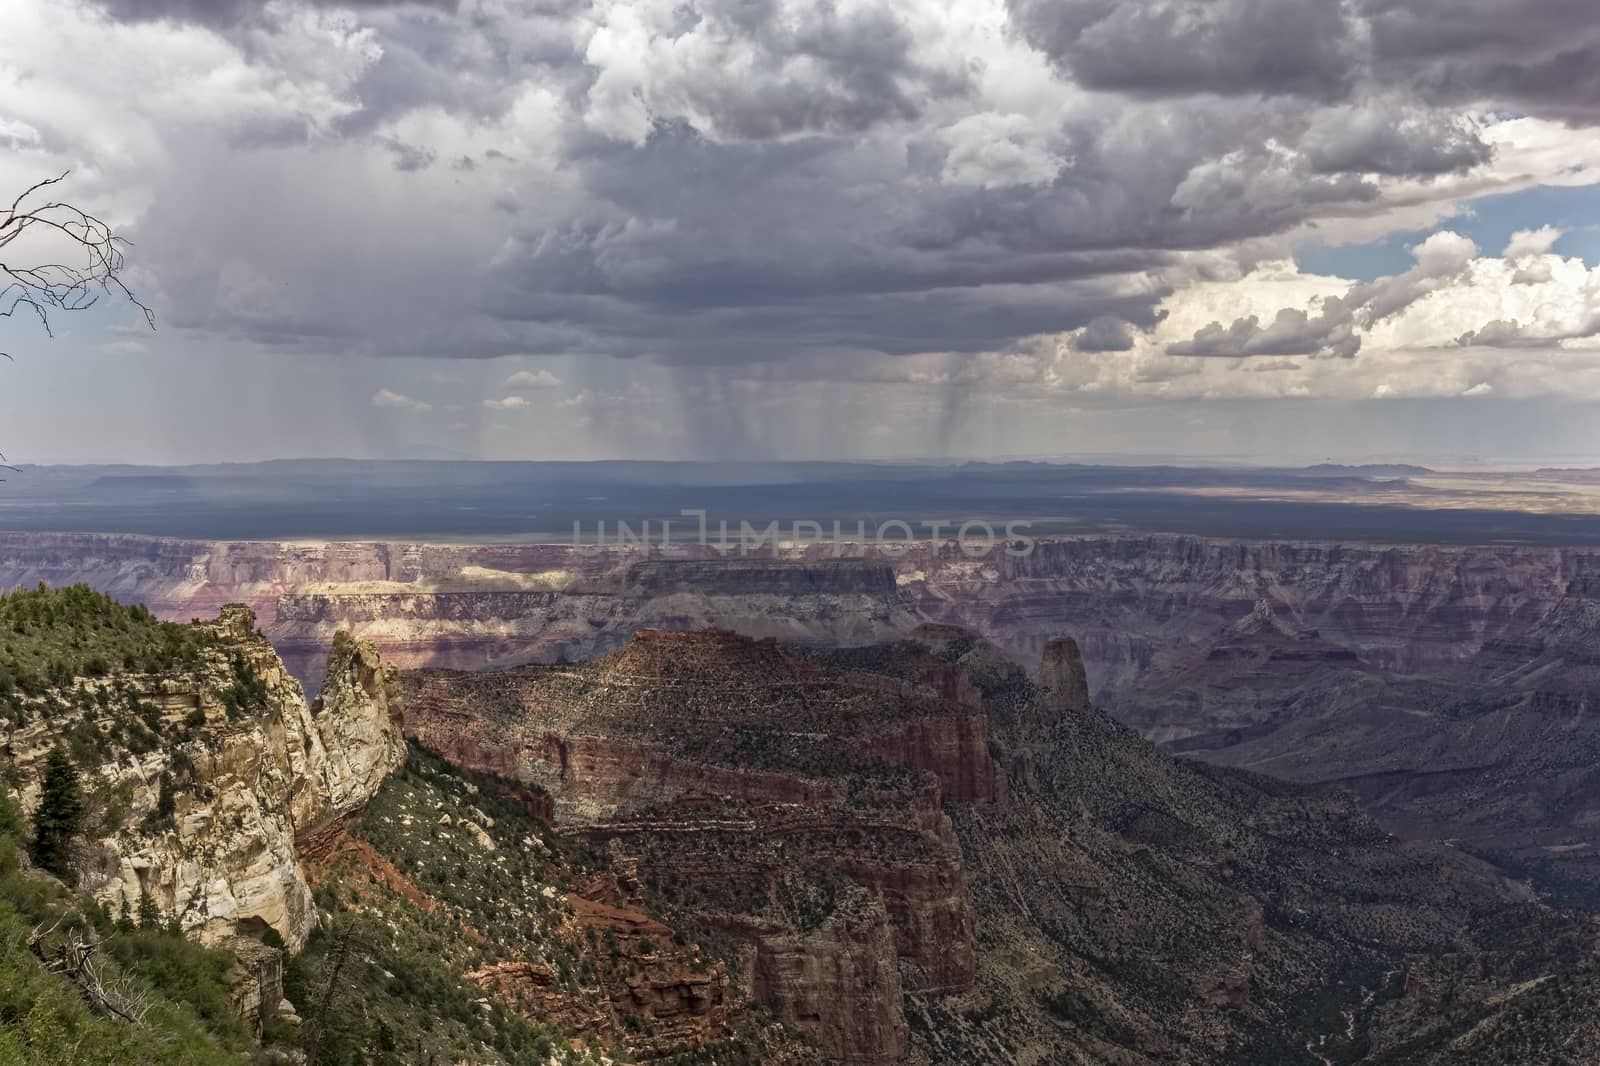 Rain on the plateau by bkenney5@gmail.com